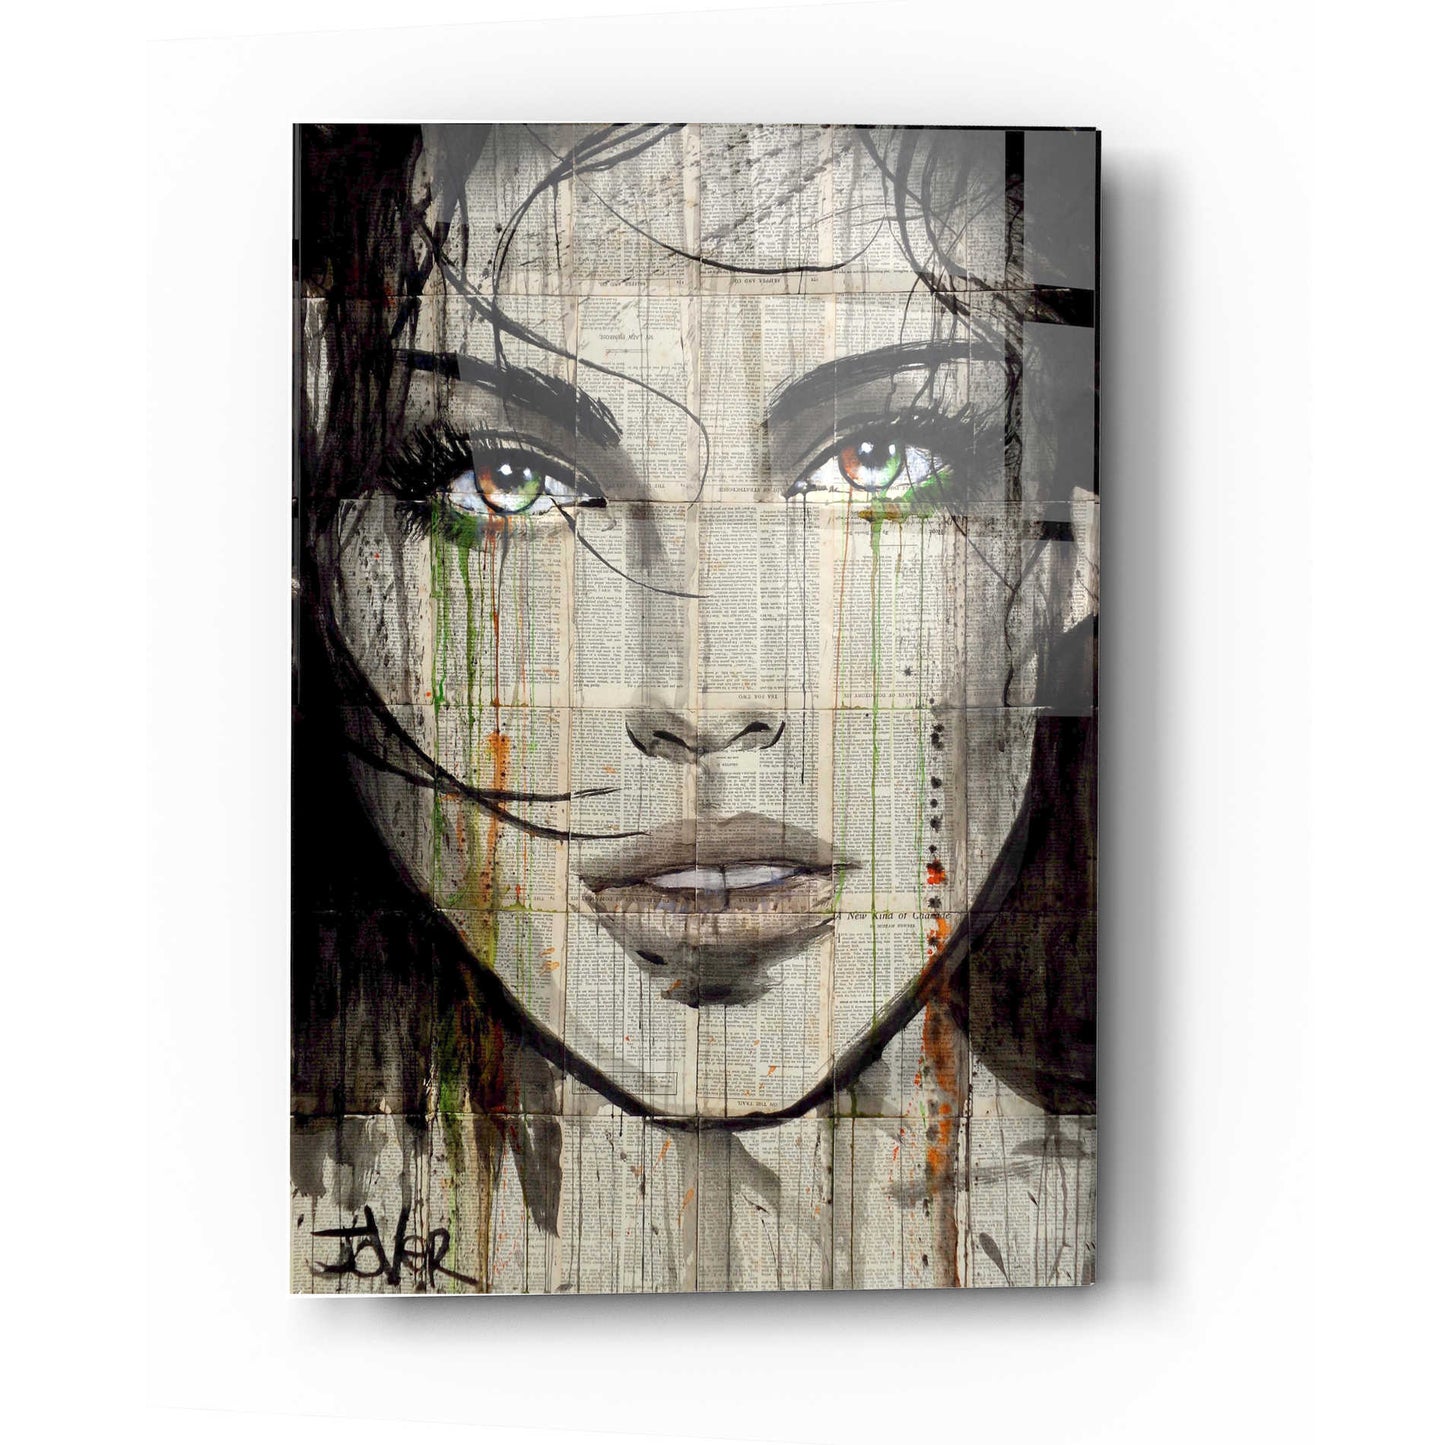 Epic Art 'Another Kind' by Loui Jover, Acrylic Glass Wall Art,12x16